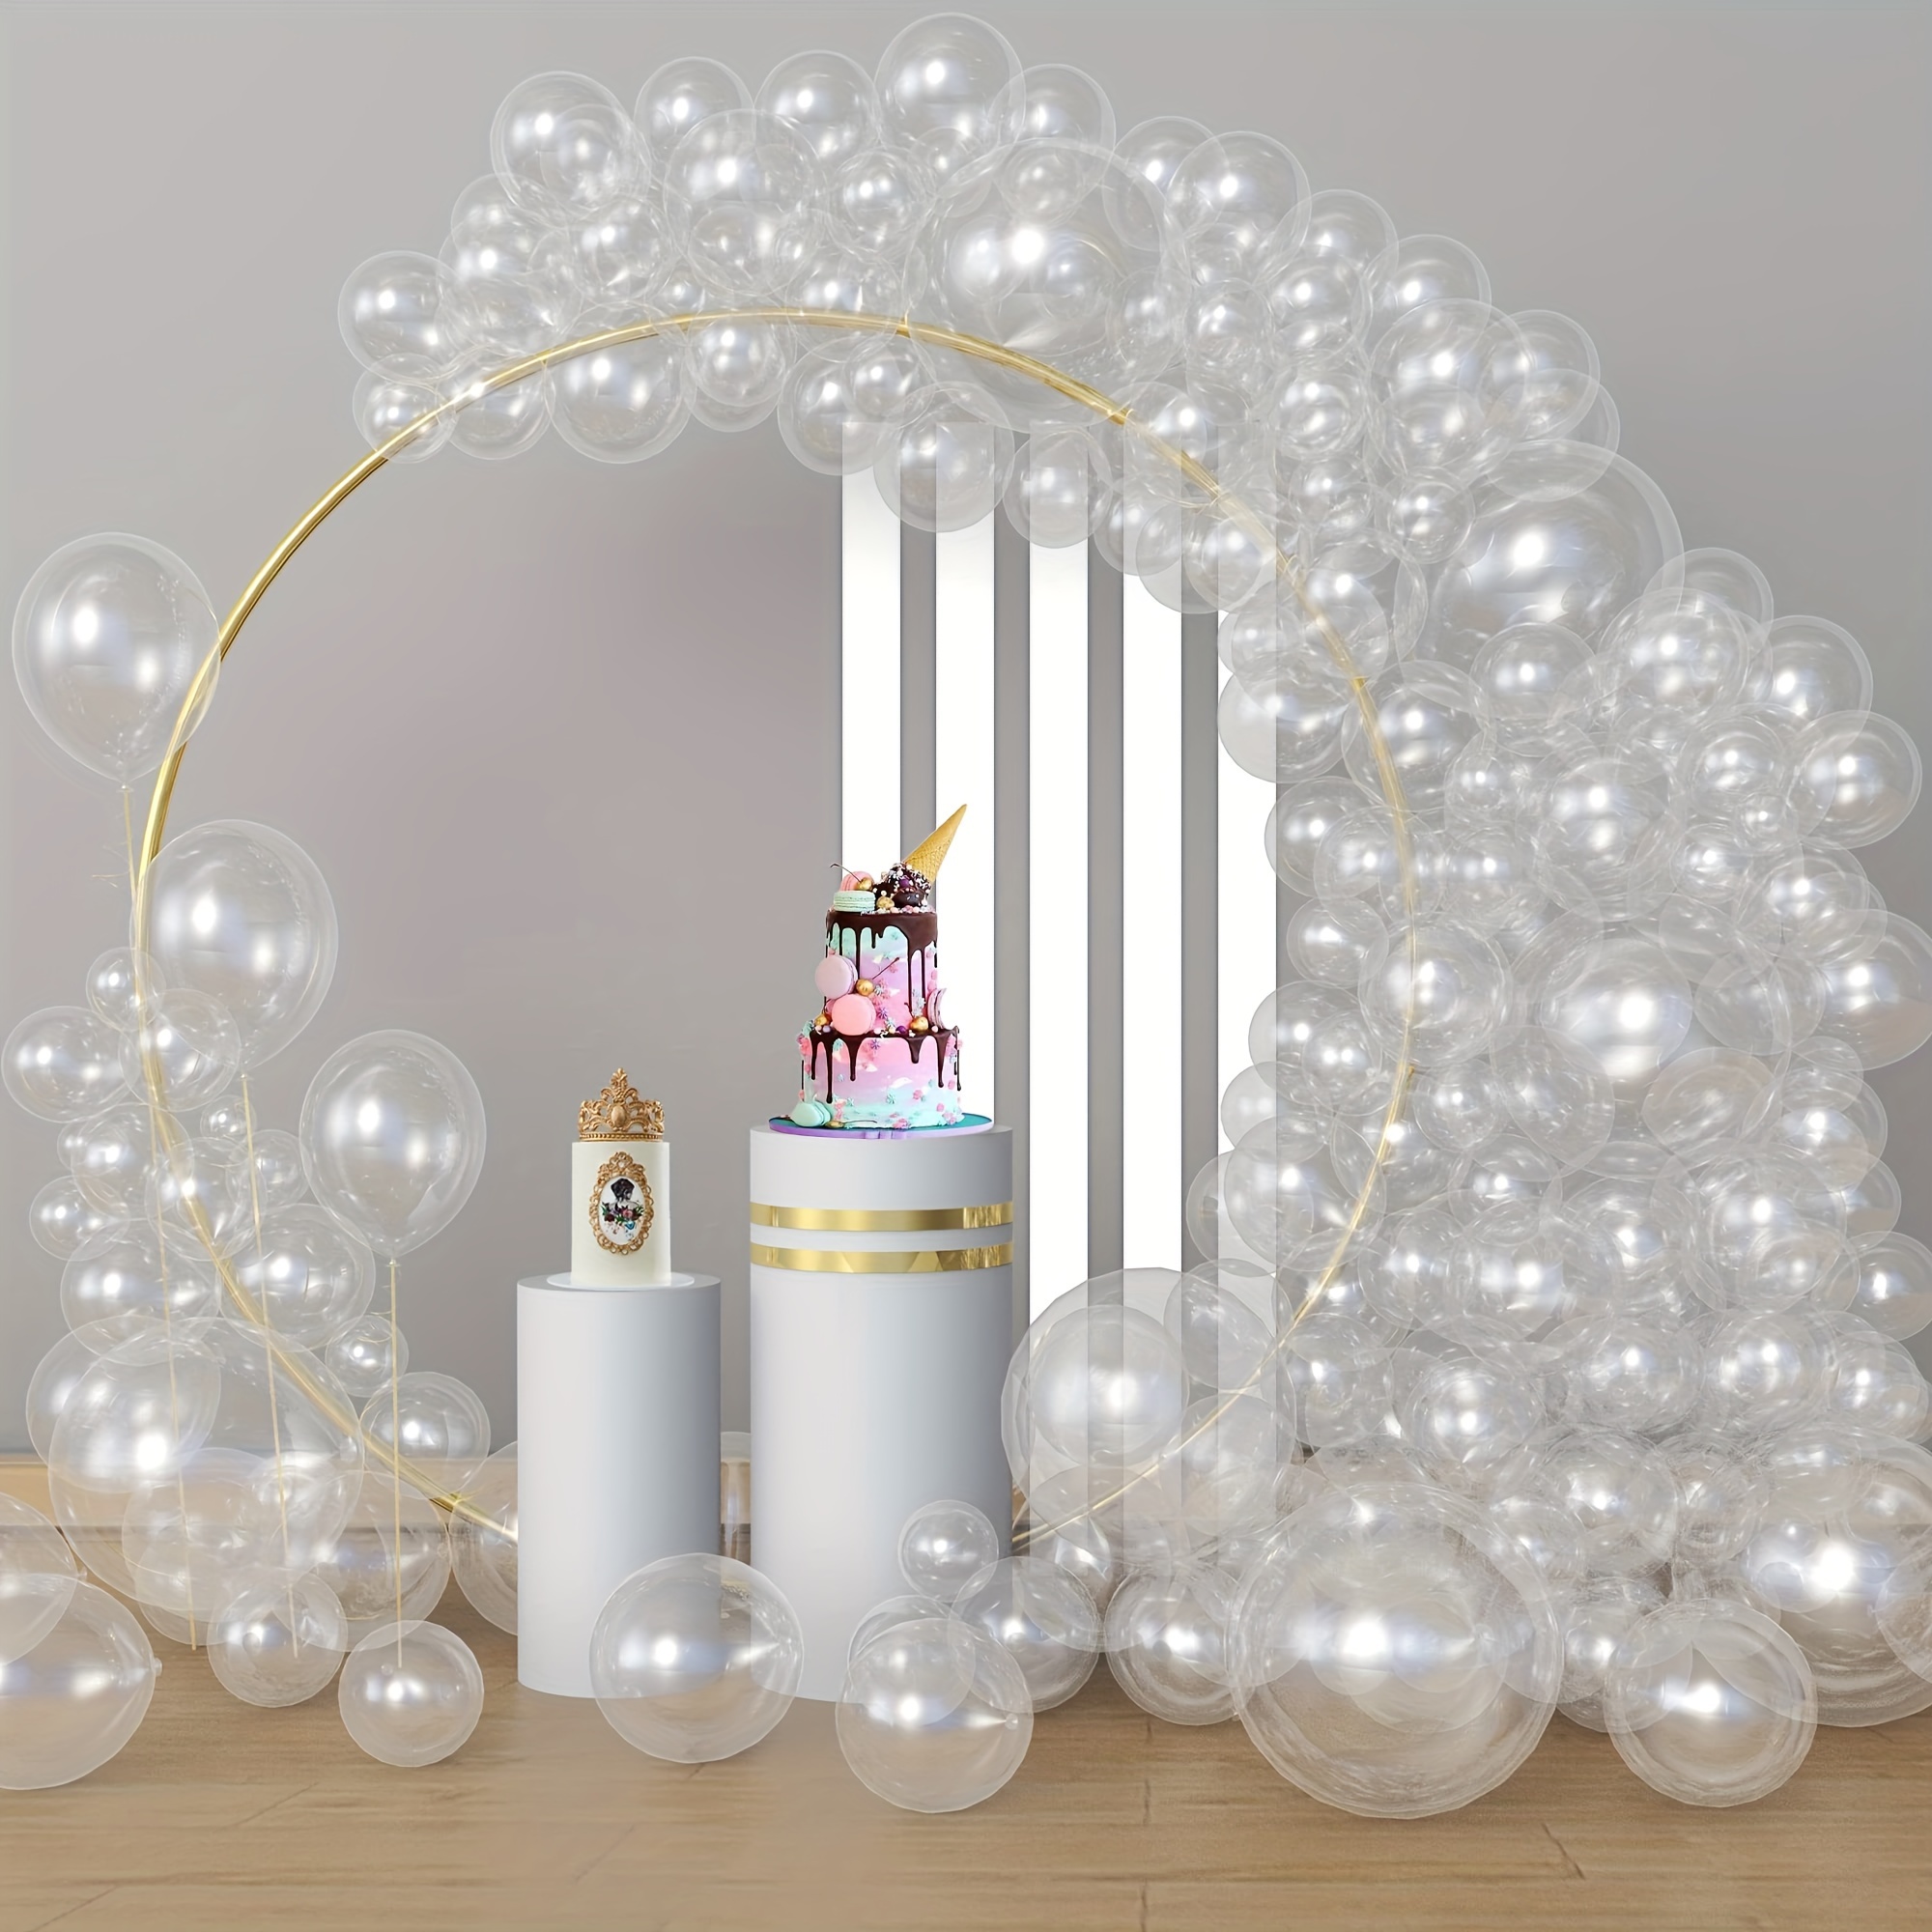 Led Light Up Balloons 7pcs 50 8cm Transparent Balloons With 7 Leds